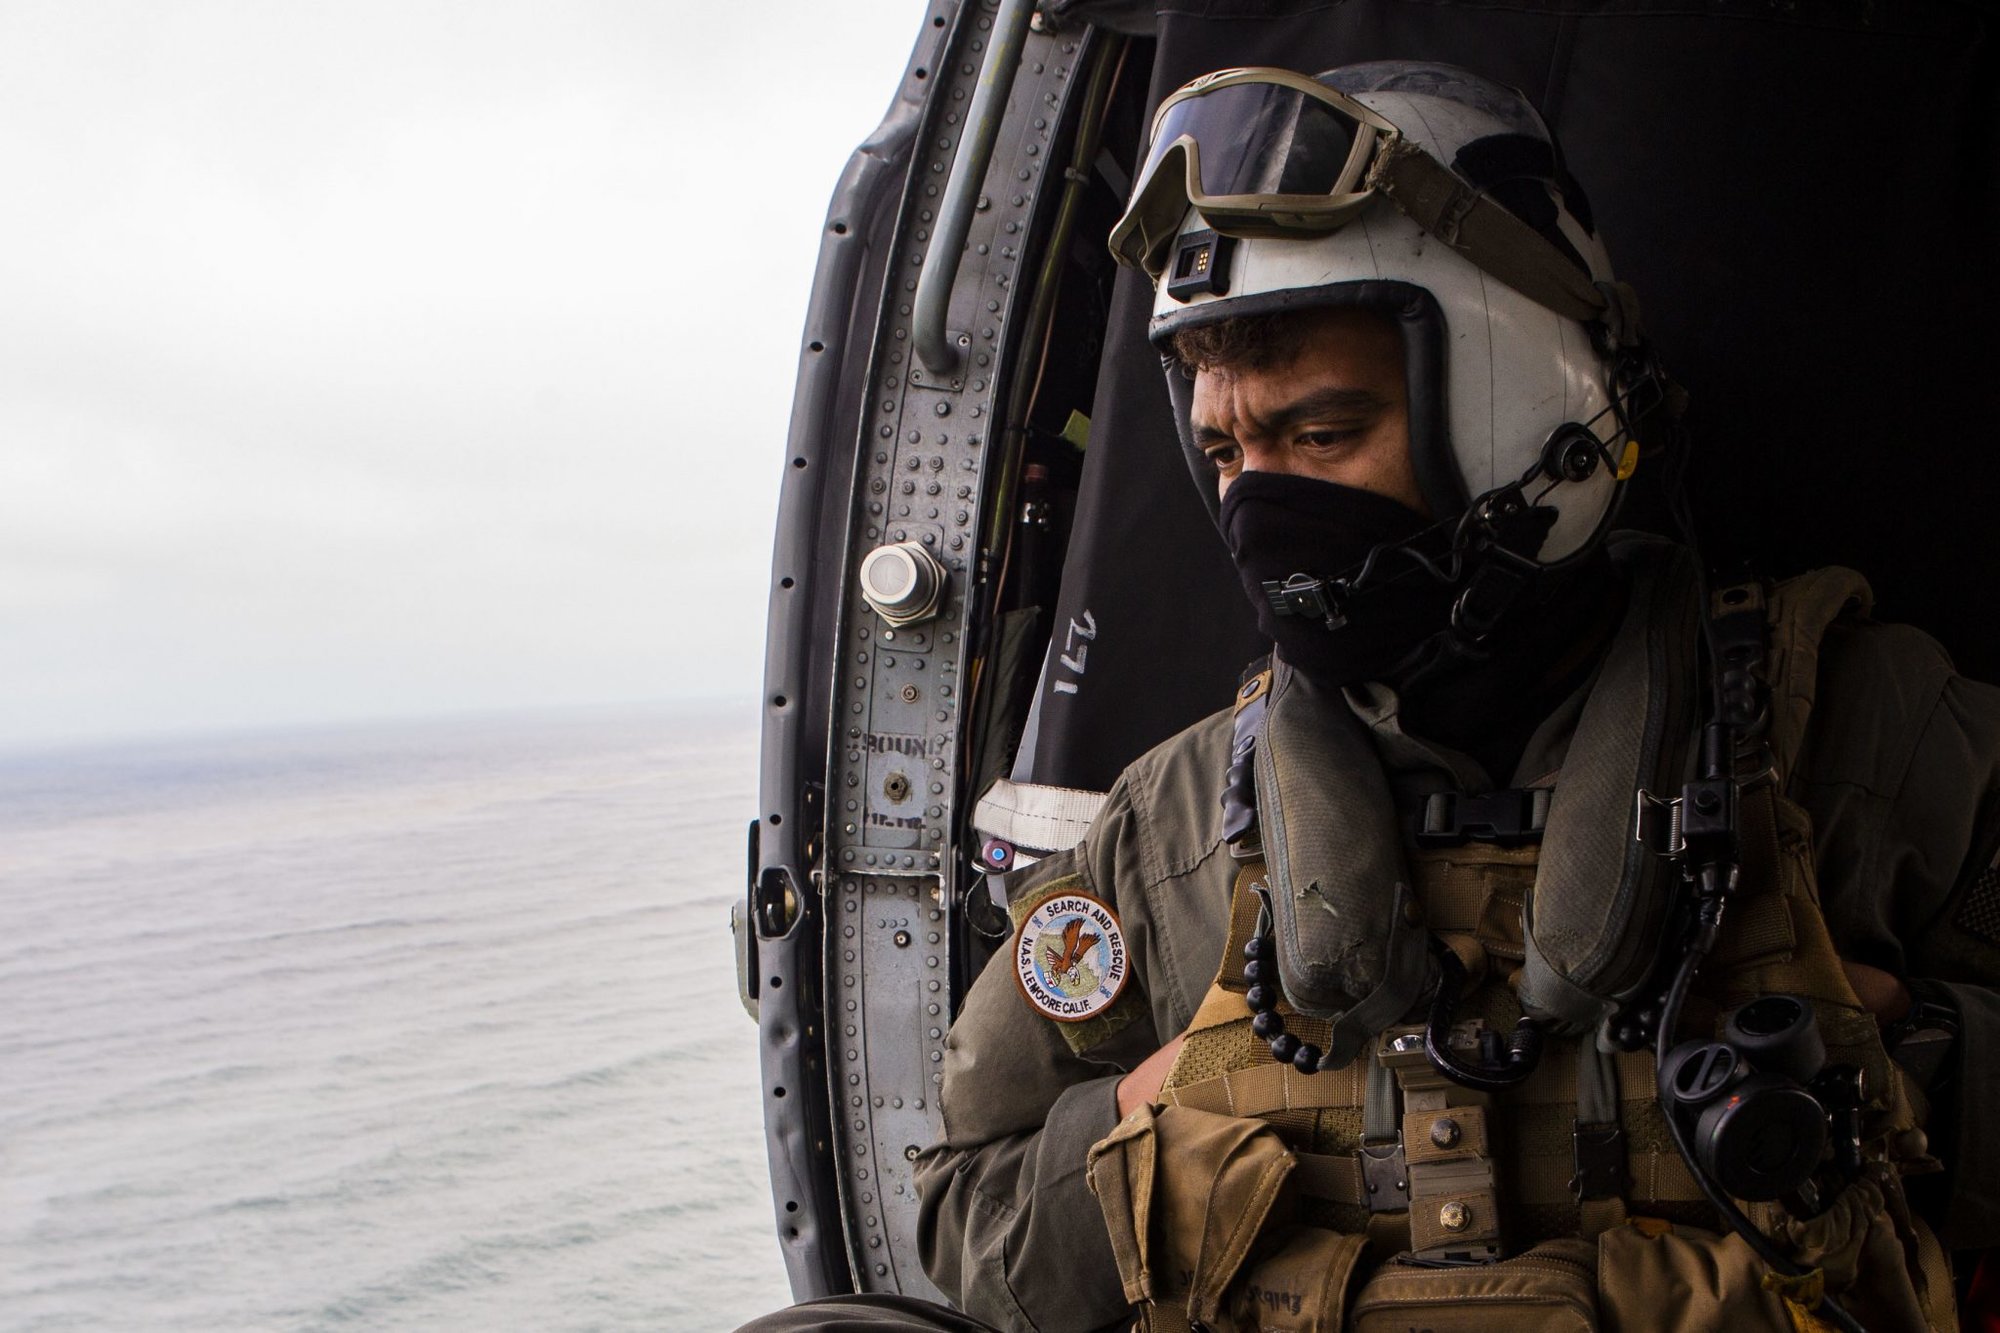 Naval Air Crewman 2nd Class Joseph Rivera, a search and rescue swimmer assigned to the amphibious assault ship USS Makin Island (LHD-8), looks out of a U.S. Navy MH-60 Seahawk while conducting search and rescue operations following an AAV-P7/A1 assault amphibious vehicle mishap off the coast of Southern California, July 30, 2020. Marine Corps photo by Lance Cpl. Mackenzie Binion